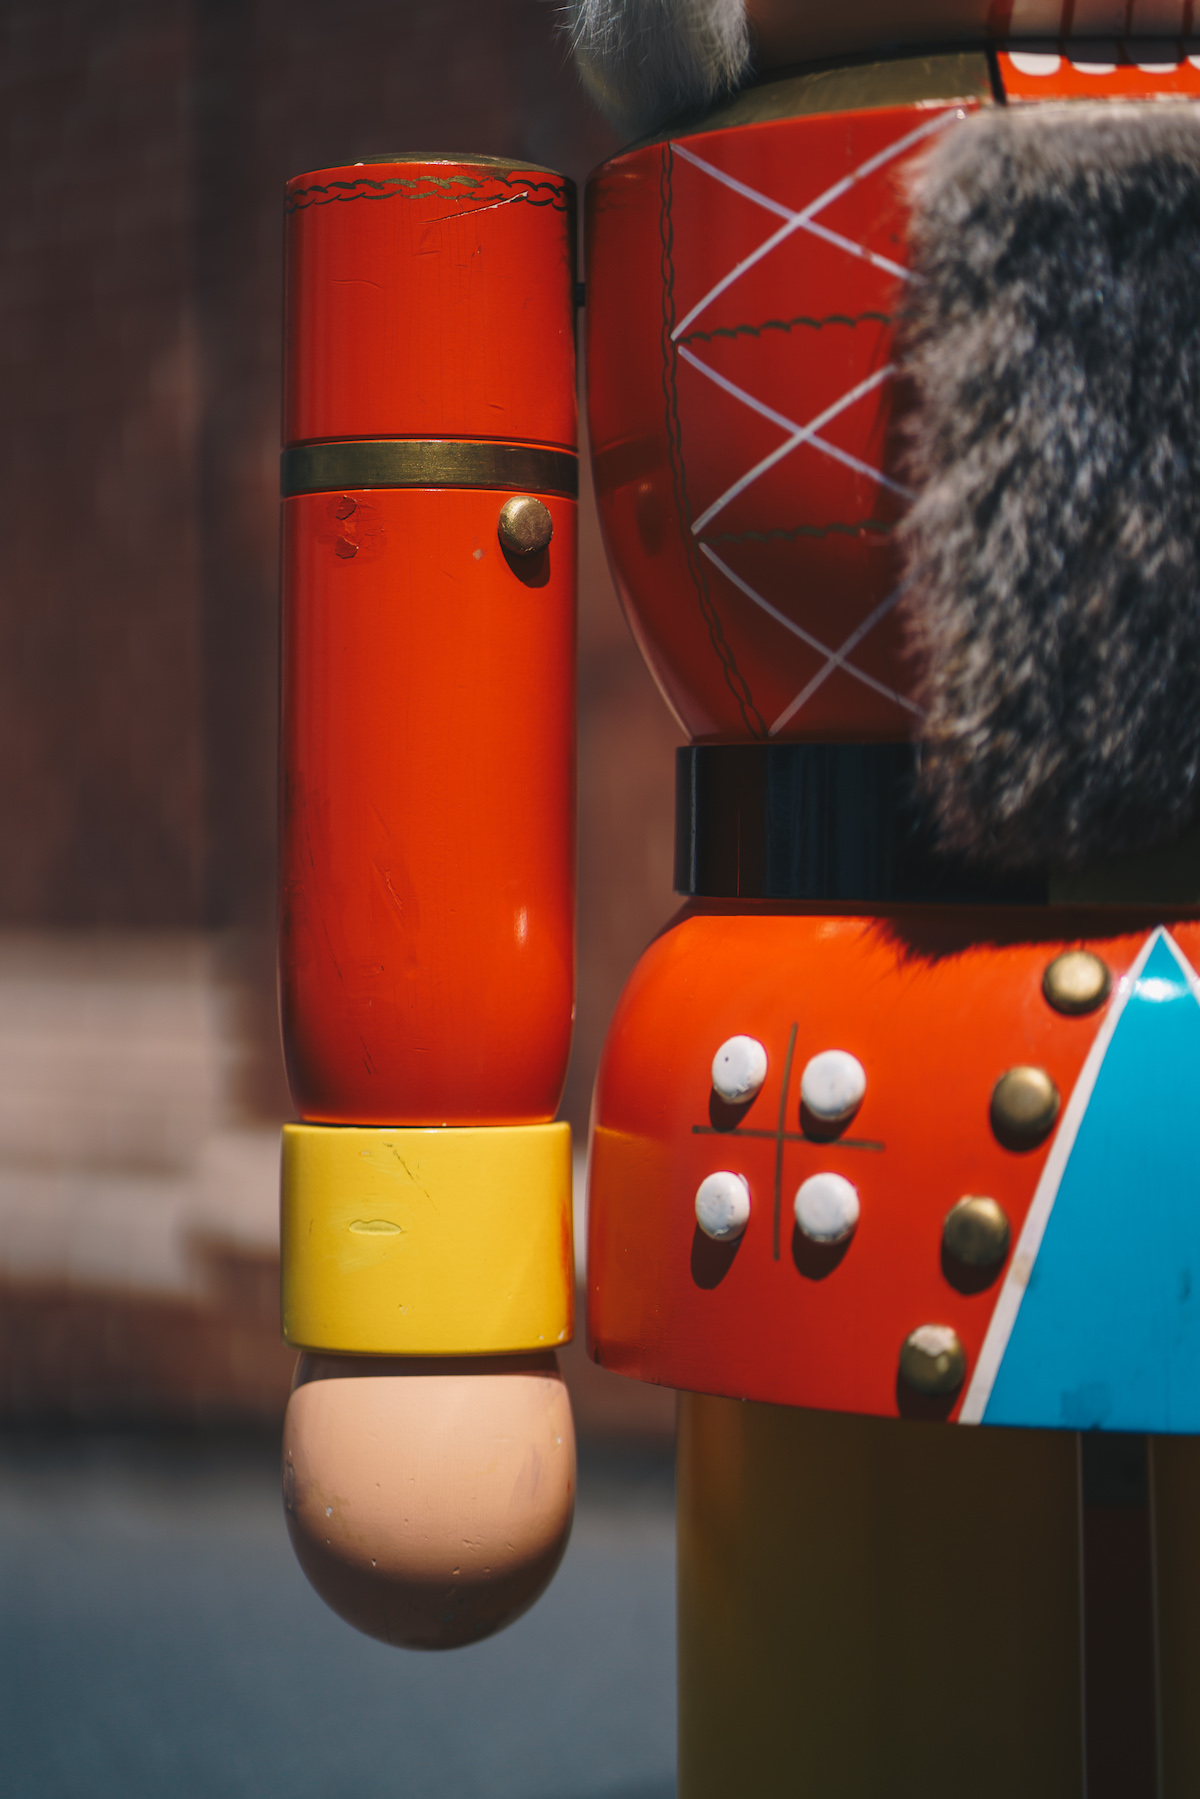 In the picture you can see a close-up of an ore birgish red nutcracker. It can be seen his right arm as well as his beard of fur and decorating buttons.